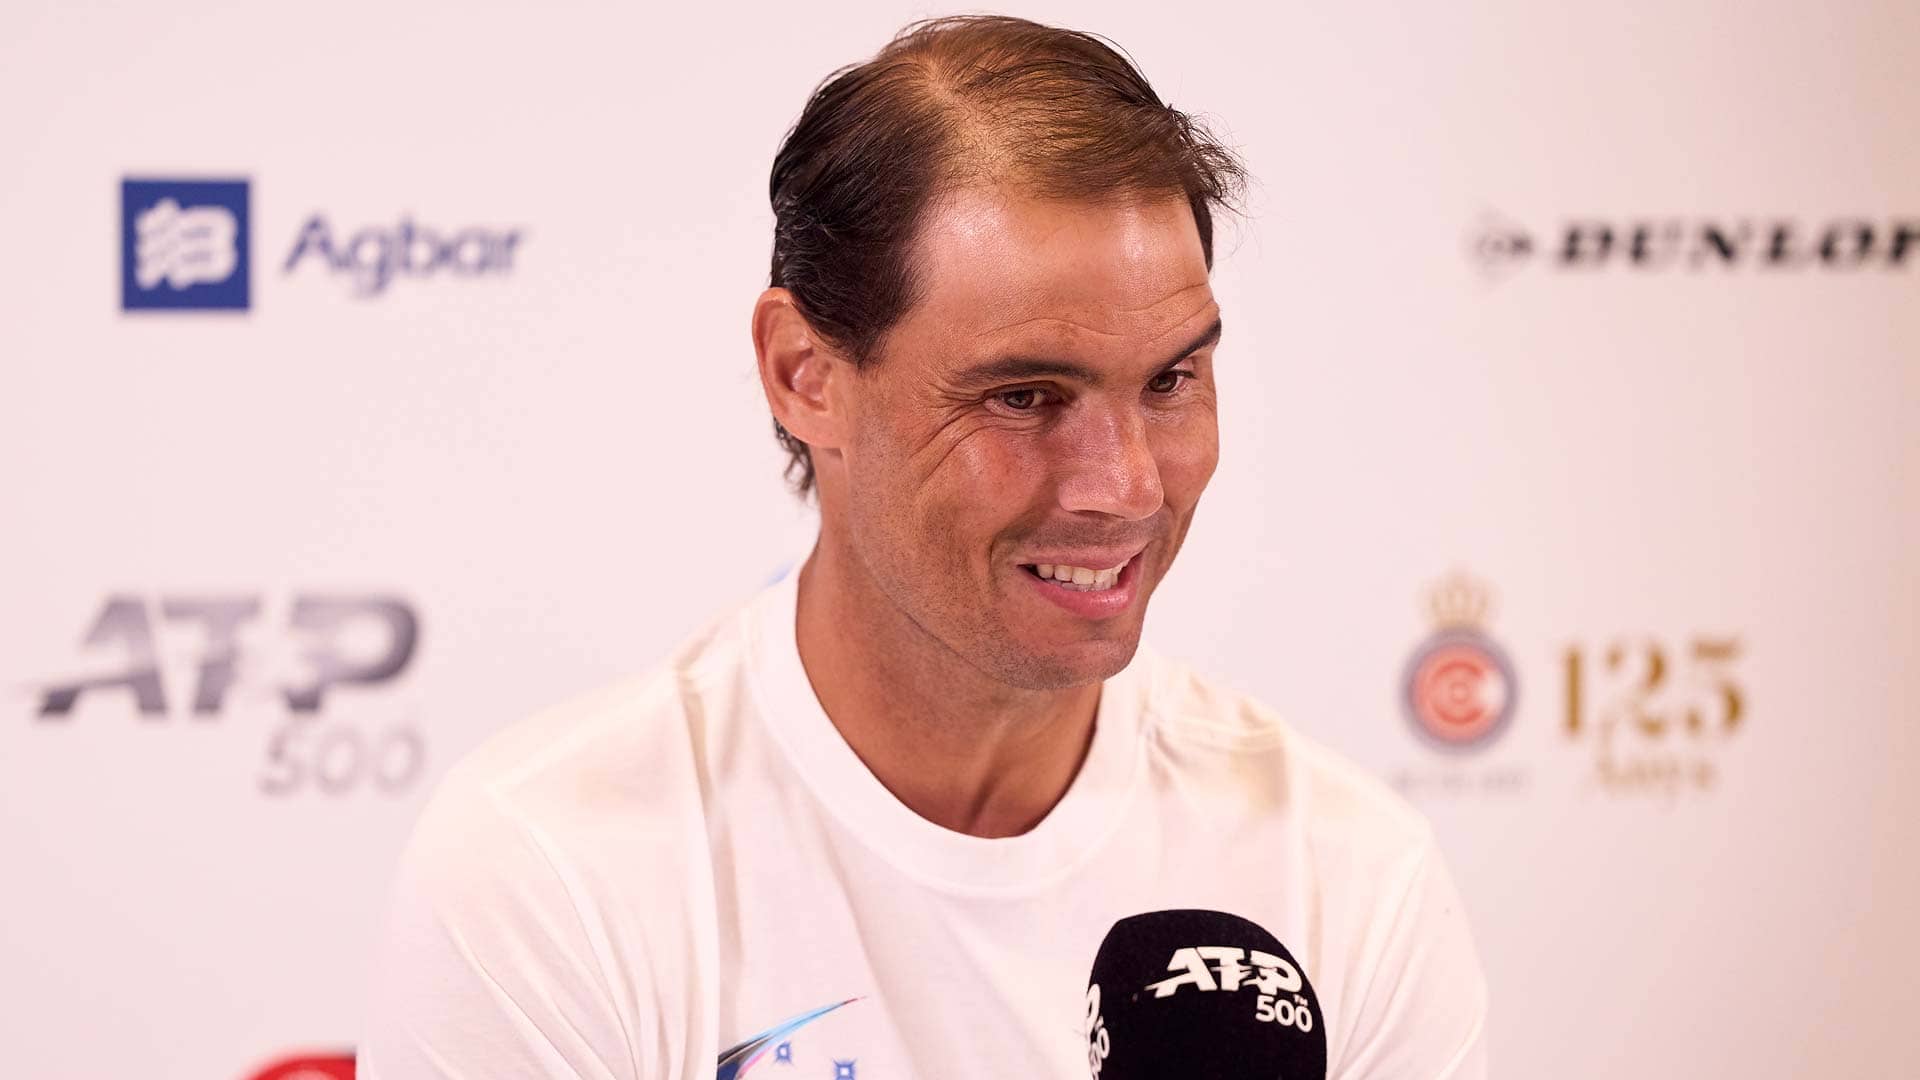 Nadal confirms he’s ready for Barcelona: ‘I’m going to give my all’